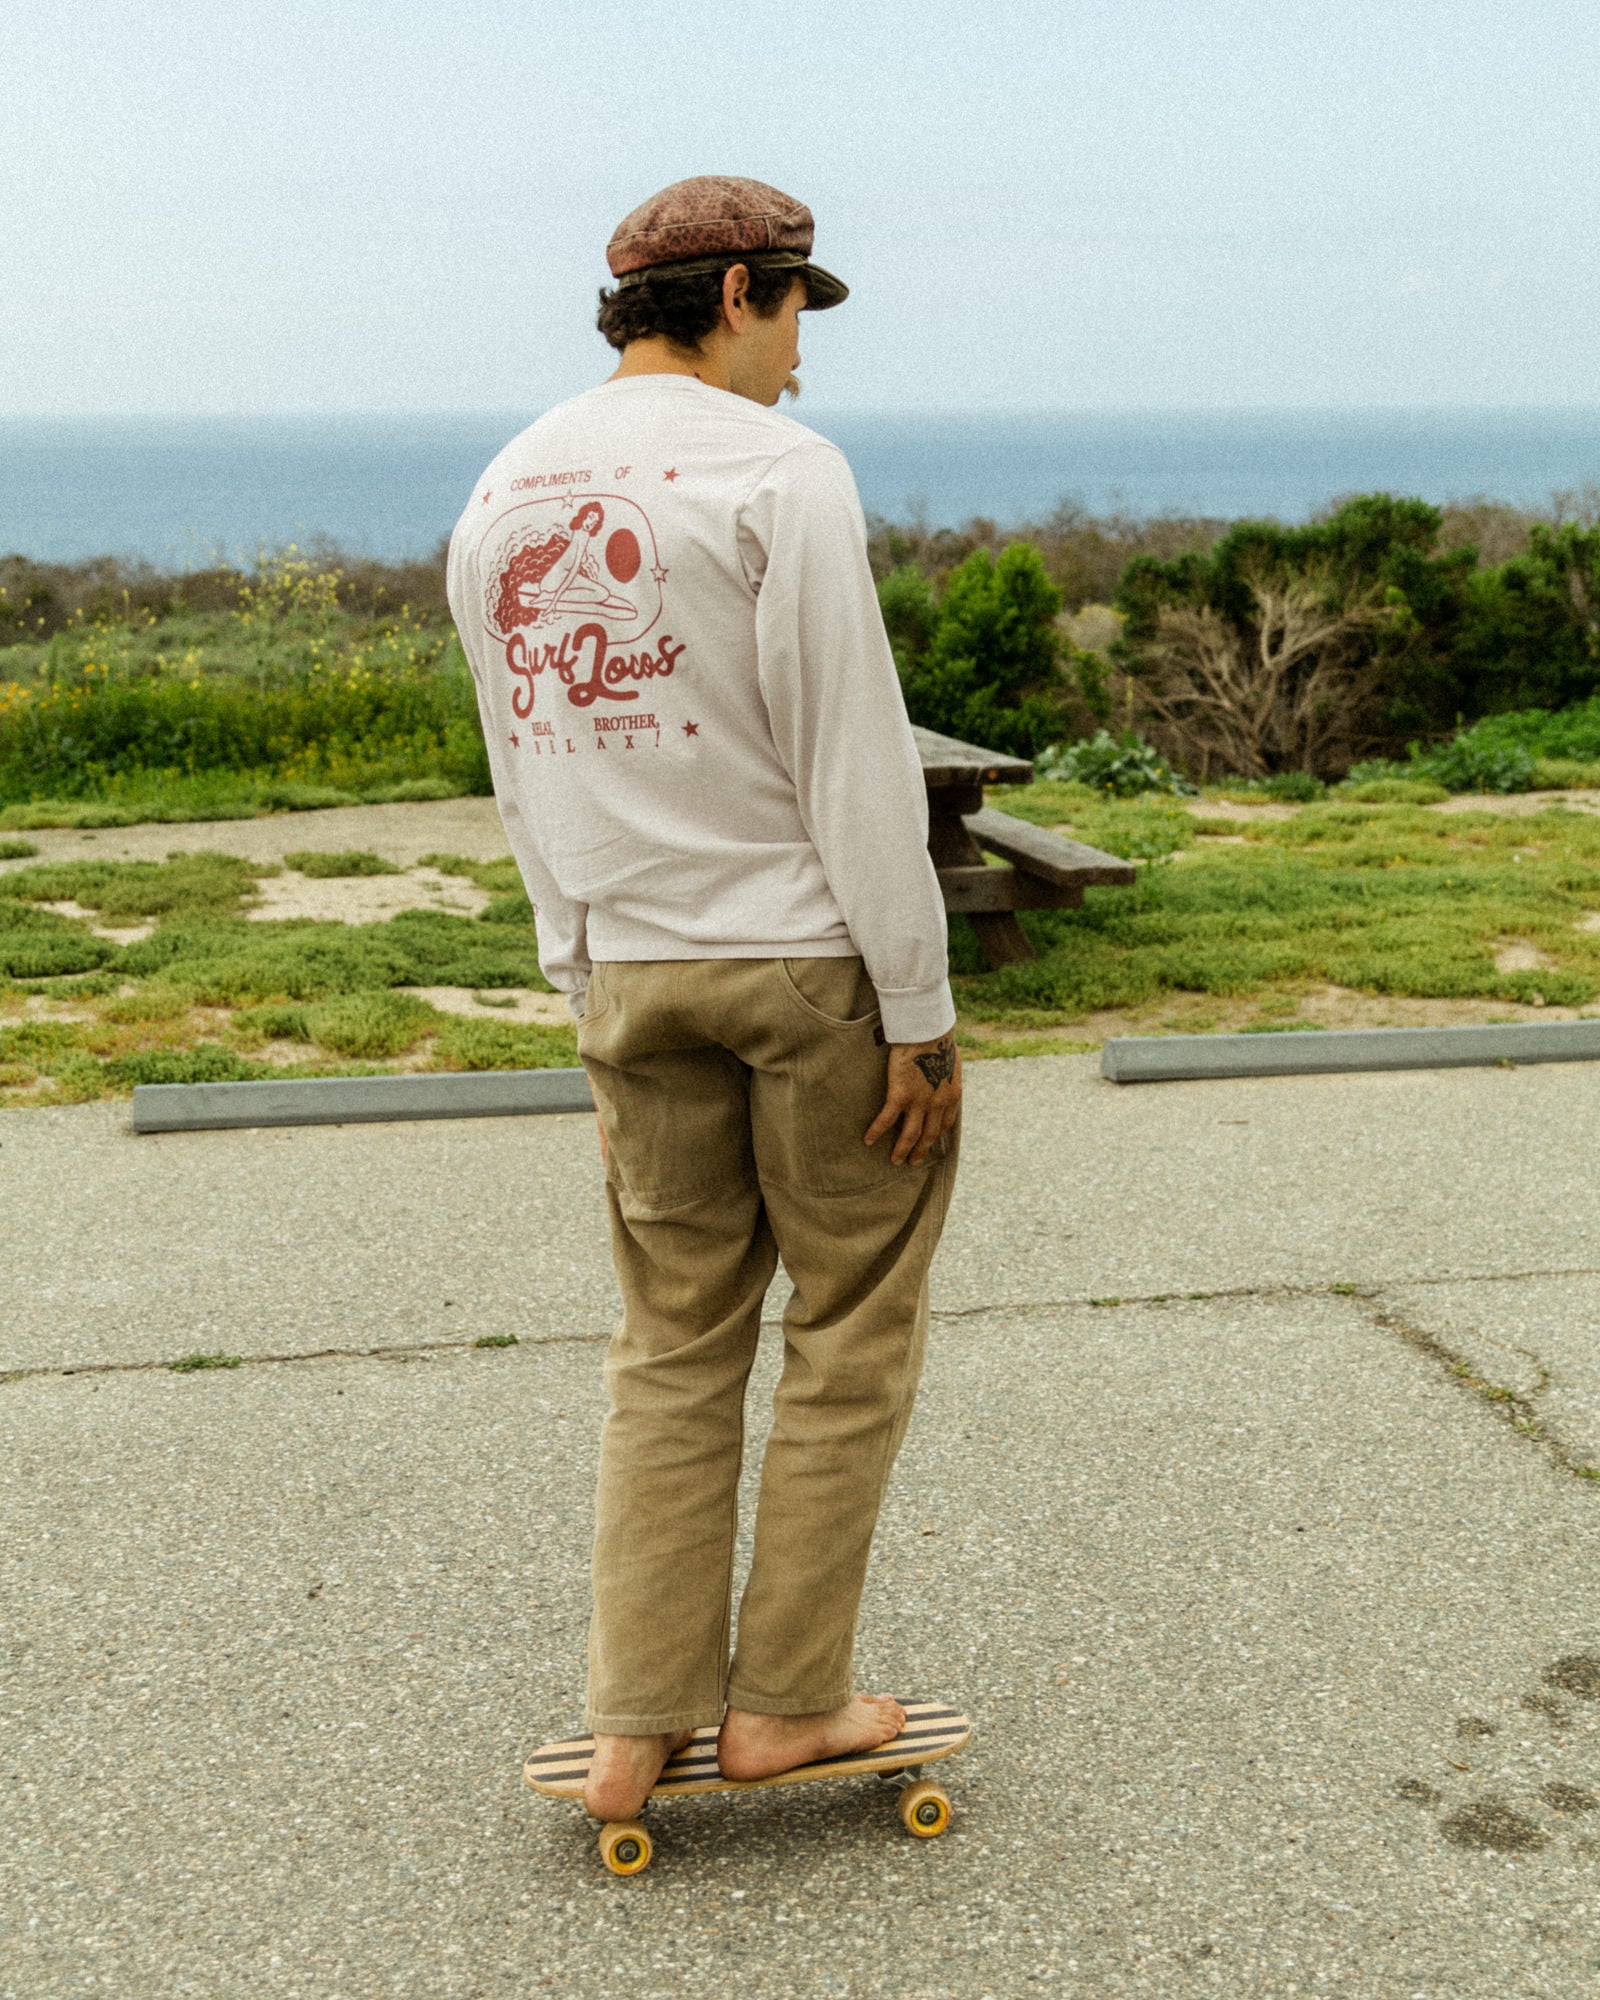 Relax Brother Long Sleeve Tee - Surf Locos